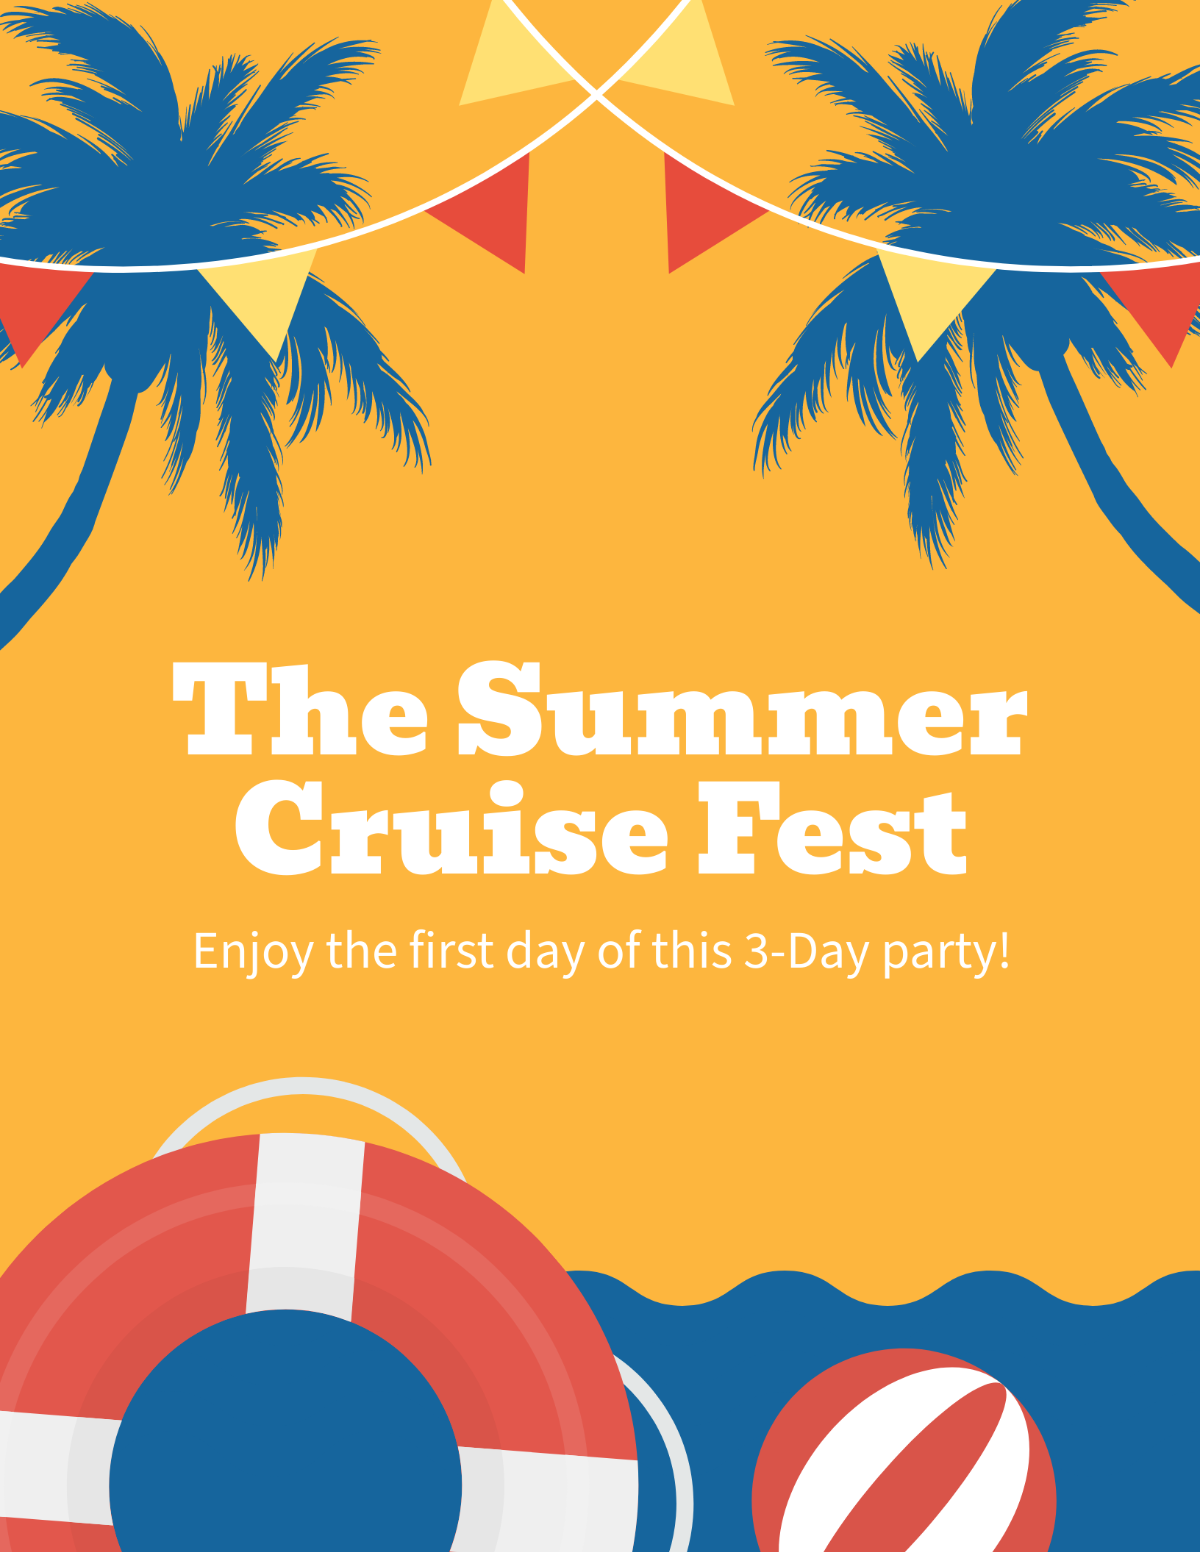 Free First Day of Summer Party Flyer Template